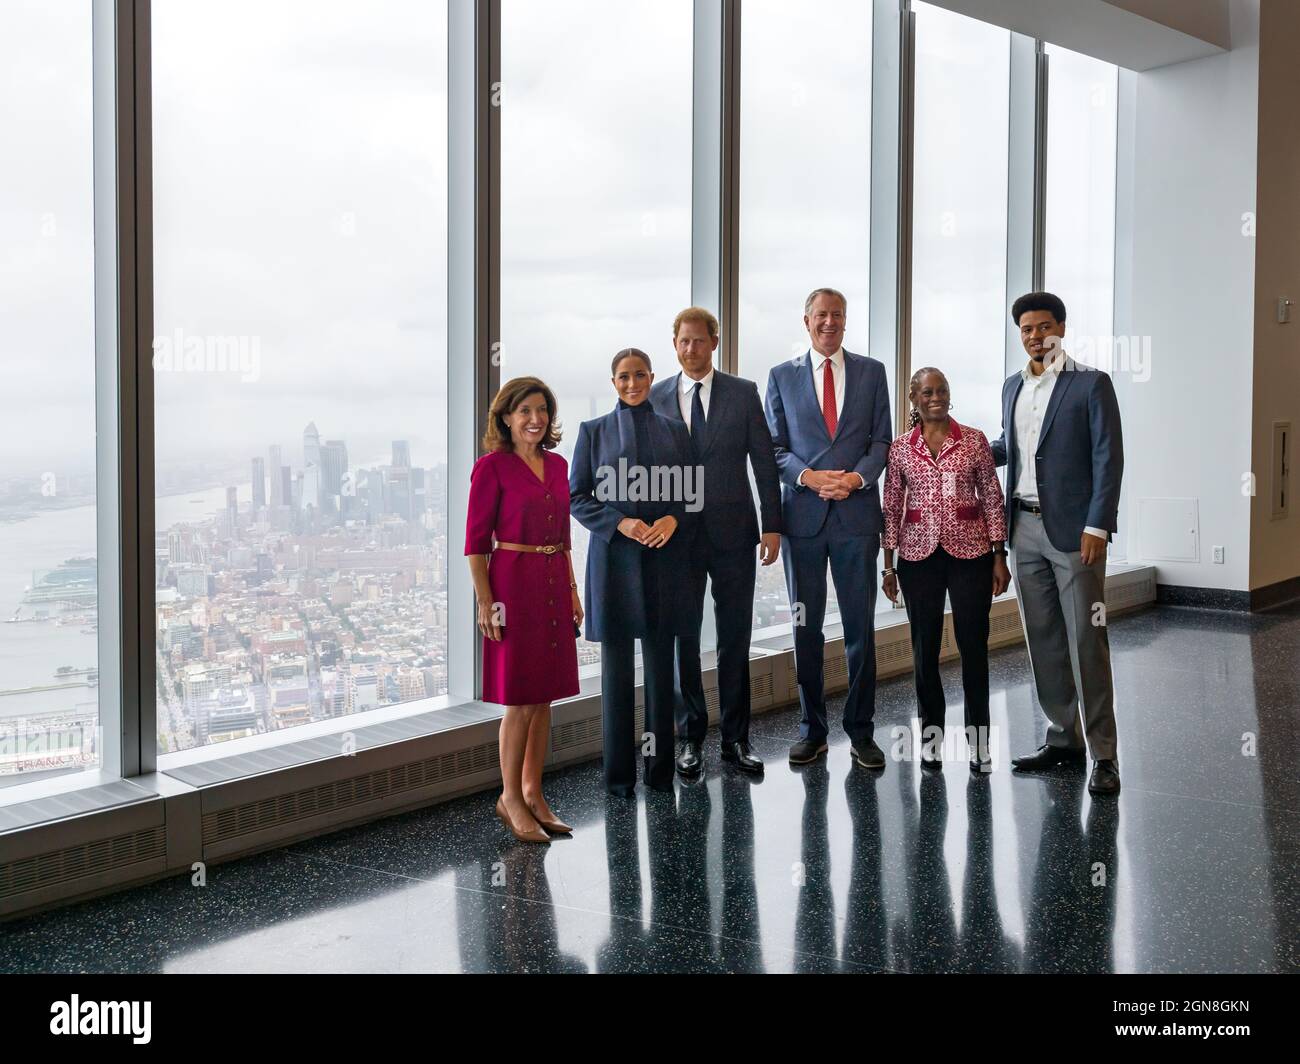 New York, USA, 23 September 2021.  (L-R):  New York Governor Kathy Hochul, Meghan, The Duchess of Sussex, Prince Harry, New York Mayor Bill de Blasio, de Blasio's wife, Chirlane McCray, and son, Dante de Blasio visit the One World Observatory in floor 102 of the New York City's World Trade Center.   Credit: Enrique Shore/Alamy Live News Stock Photo